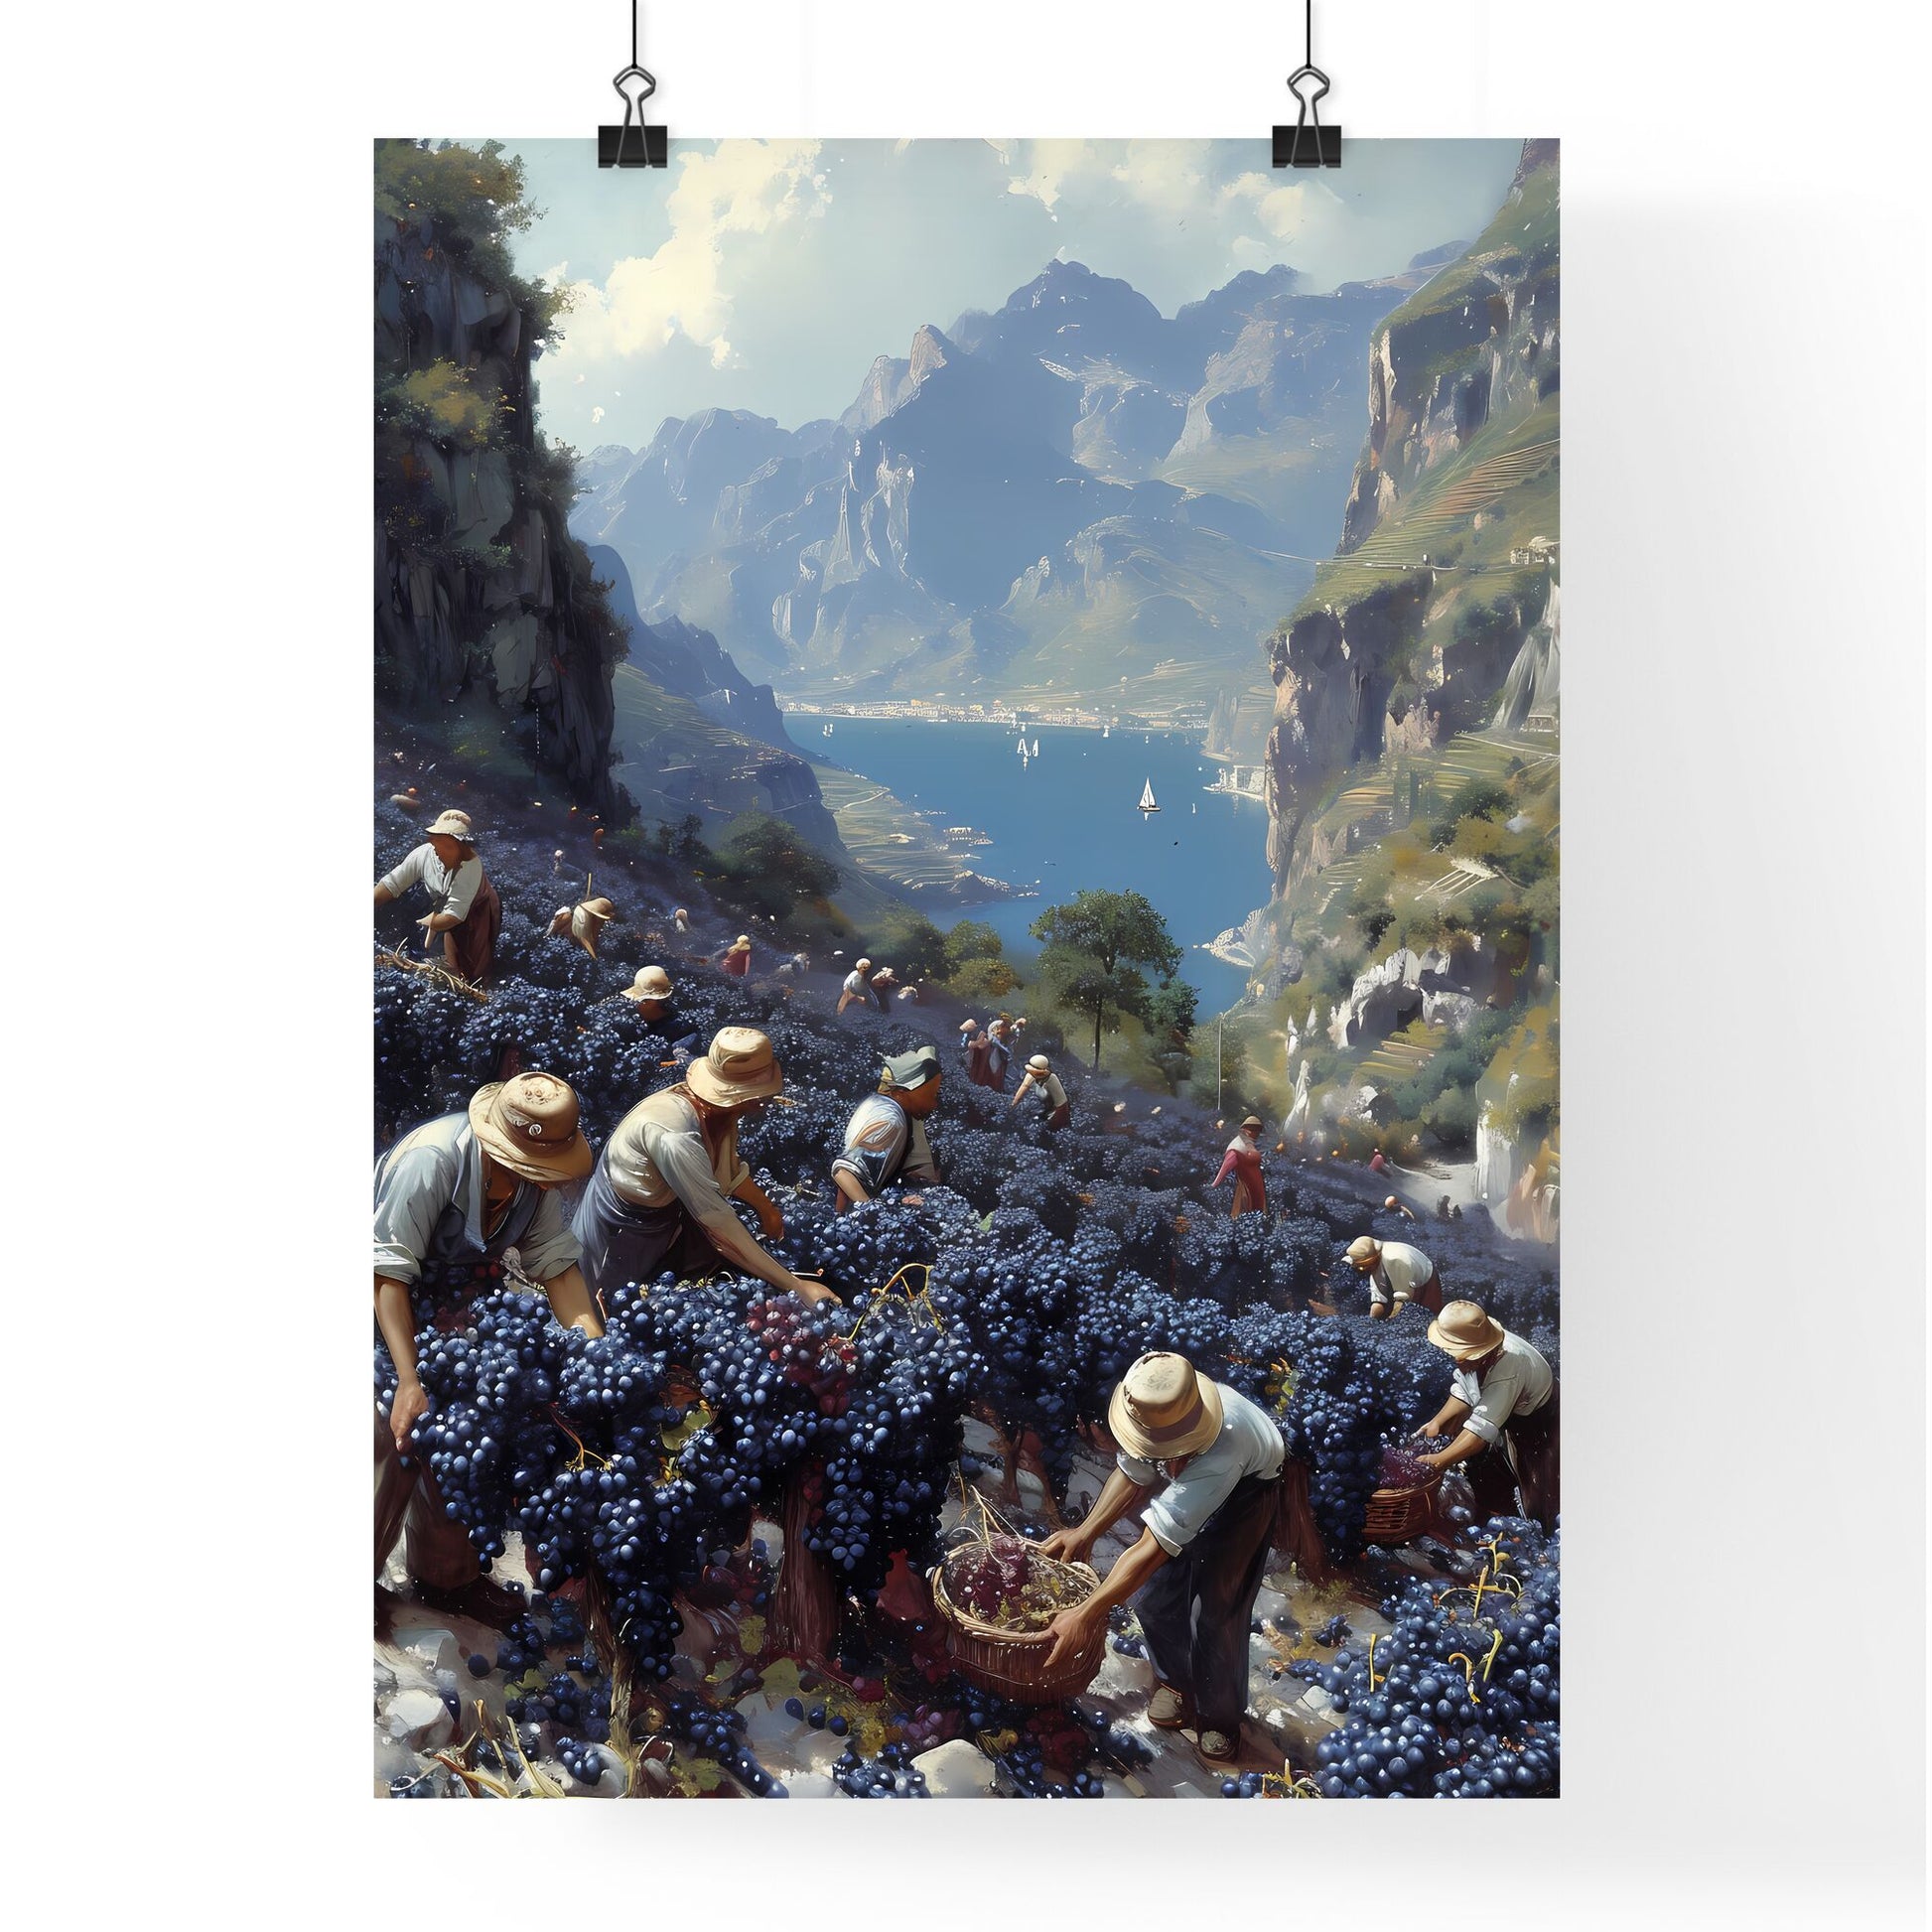 A picture of a Sicilian vineyard - Art print of a colorful waves with dots Default Title